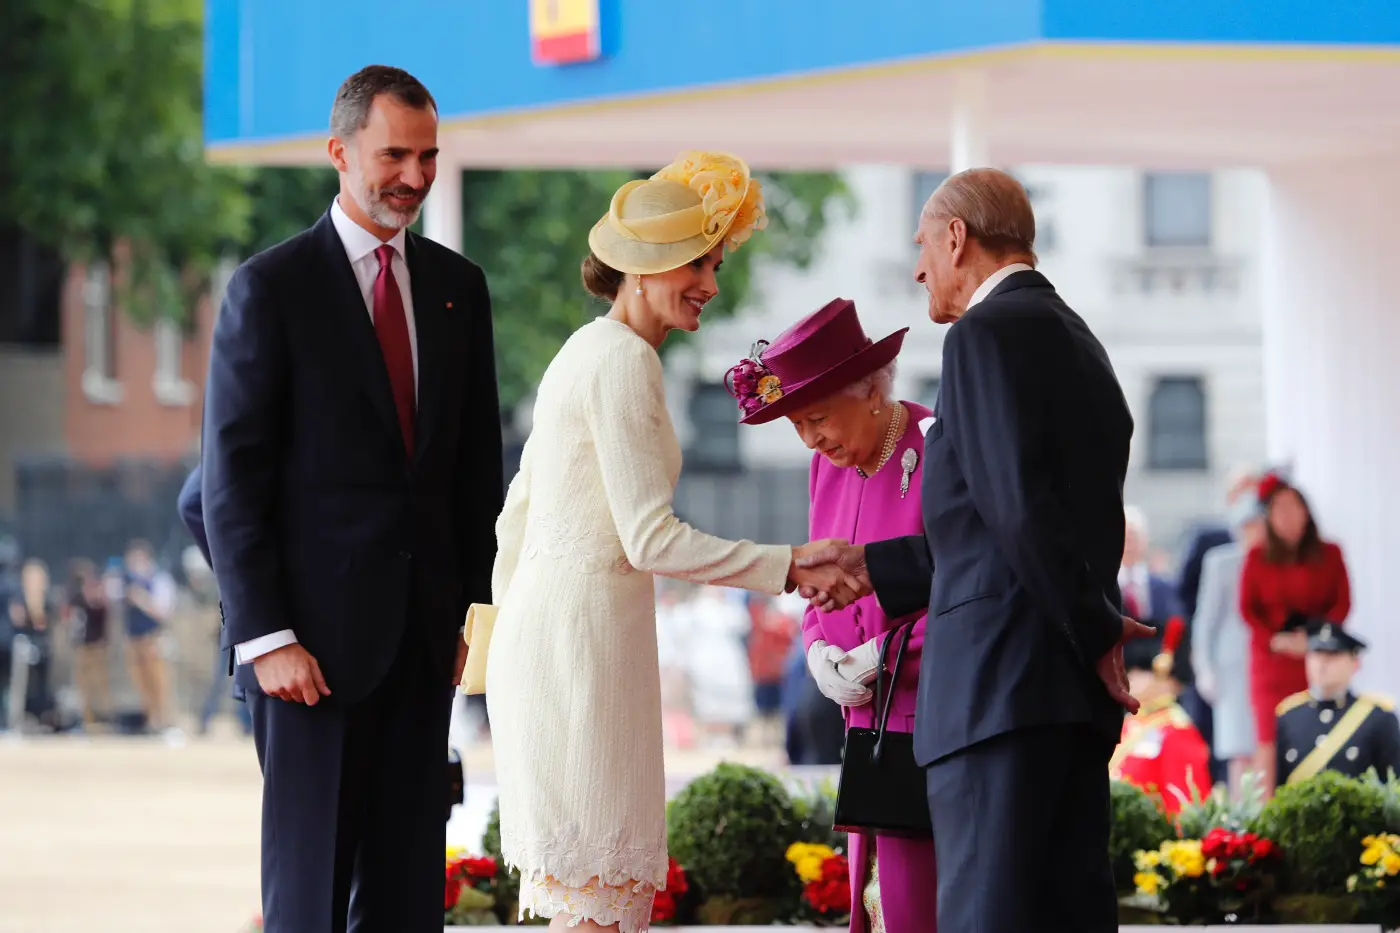 Spanish Monarch received a traditional English royal welcome from Queen Elizabeth II and Duke of Edinburgh